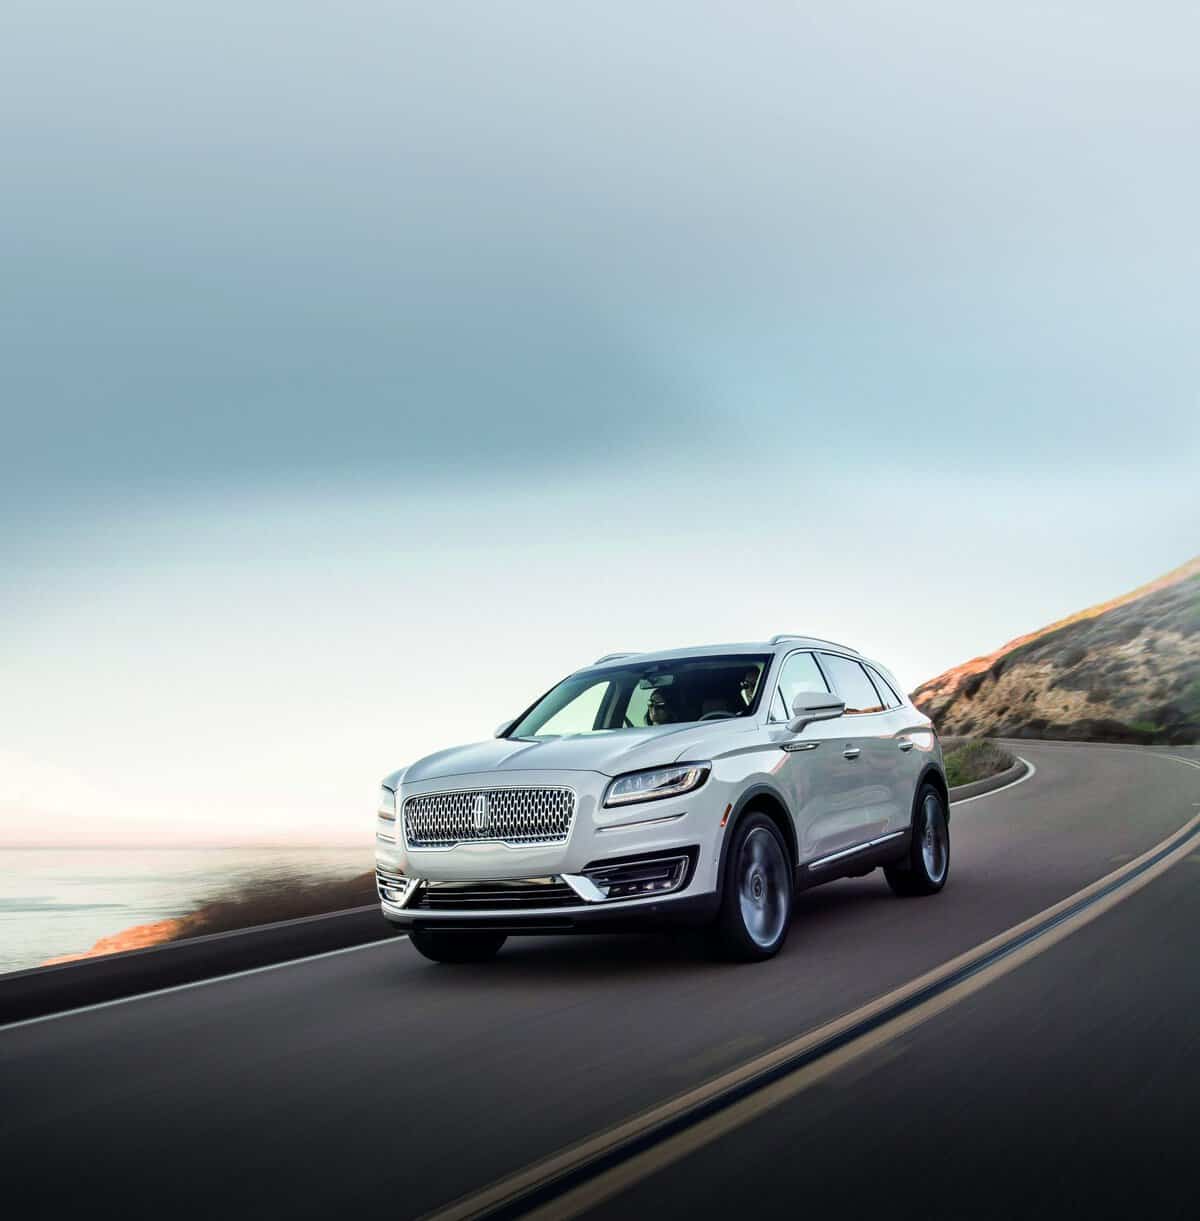 The Lincoln Motor Company introduces the new Lincoln Nautilus, a midsize luxury SUV delivering a powerful turbocharged engine range and a suite of advanced technologies designed to give drivers greater confidence on the road.